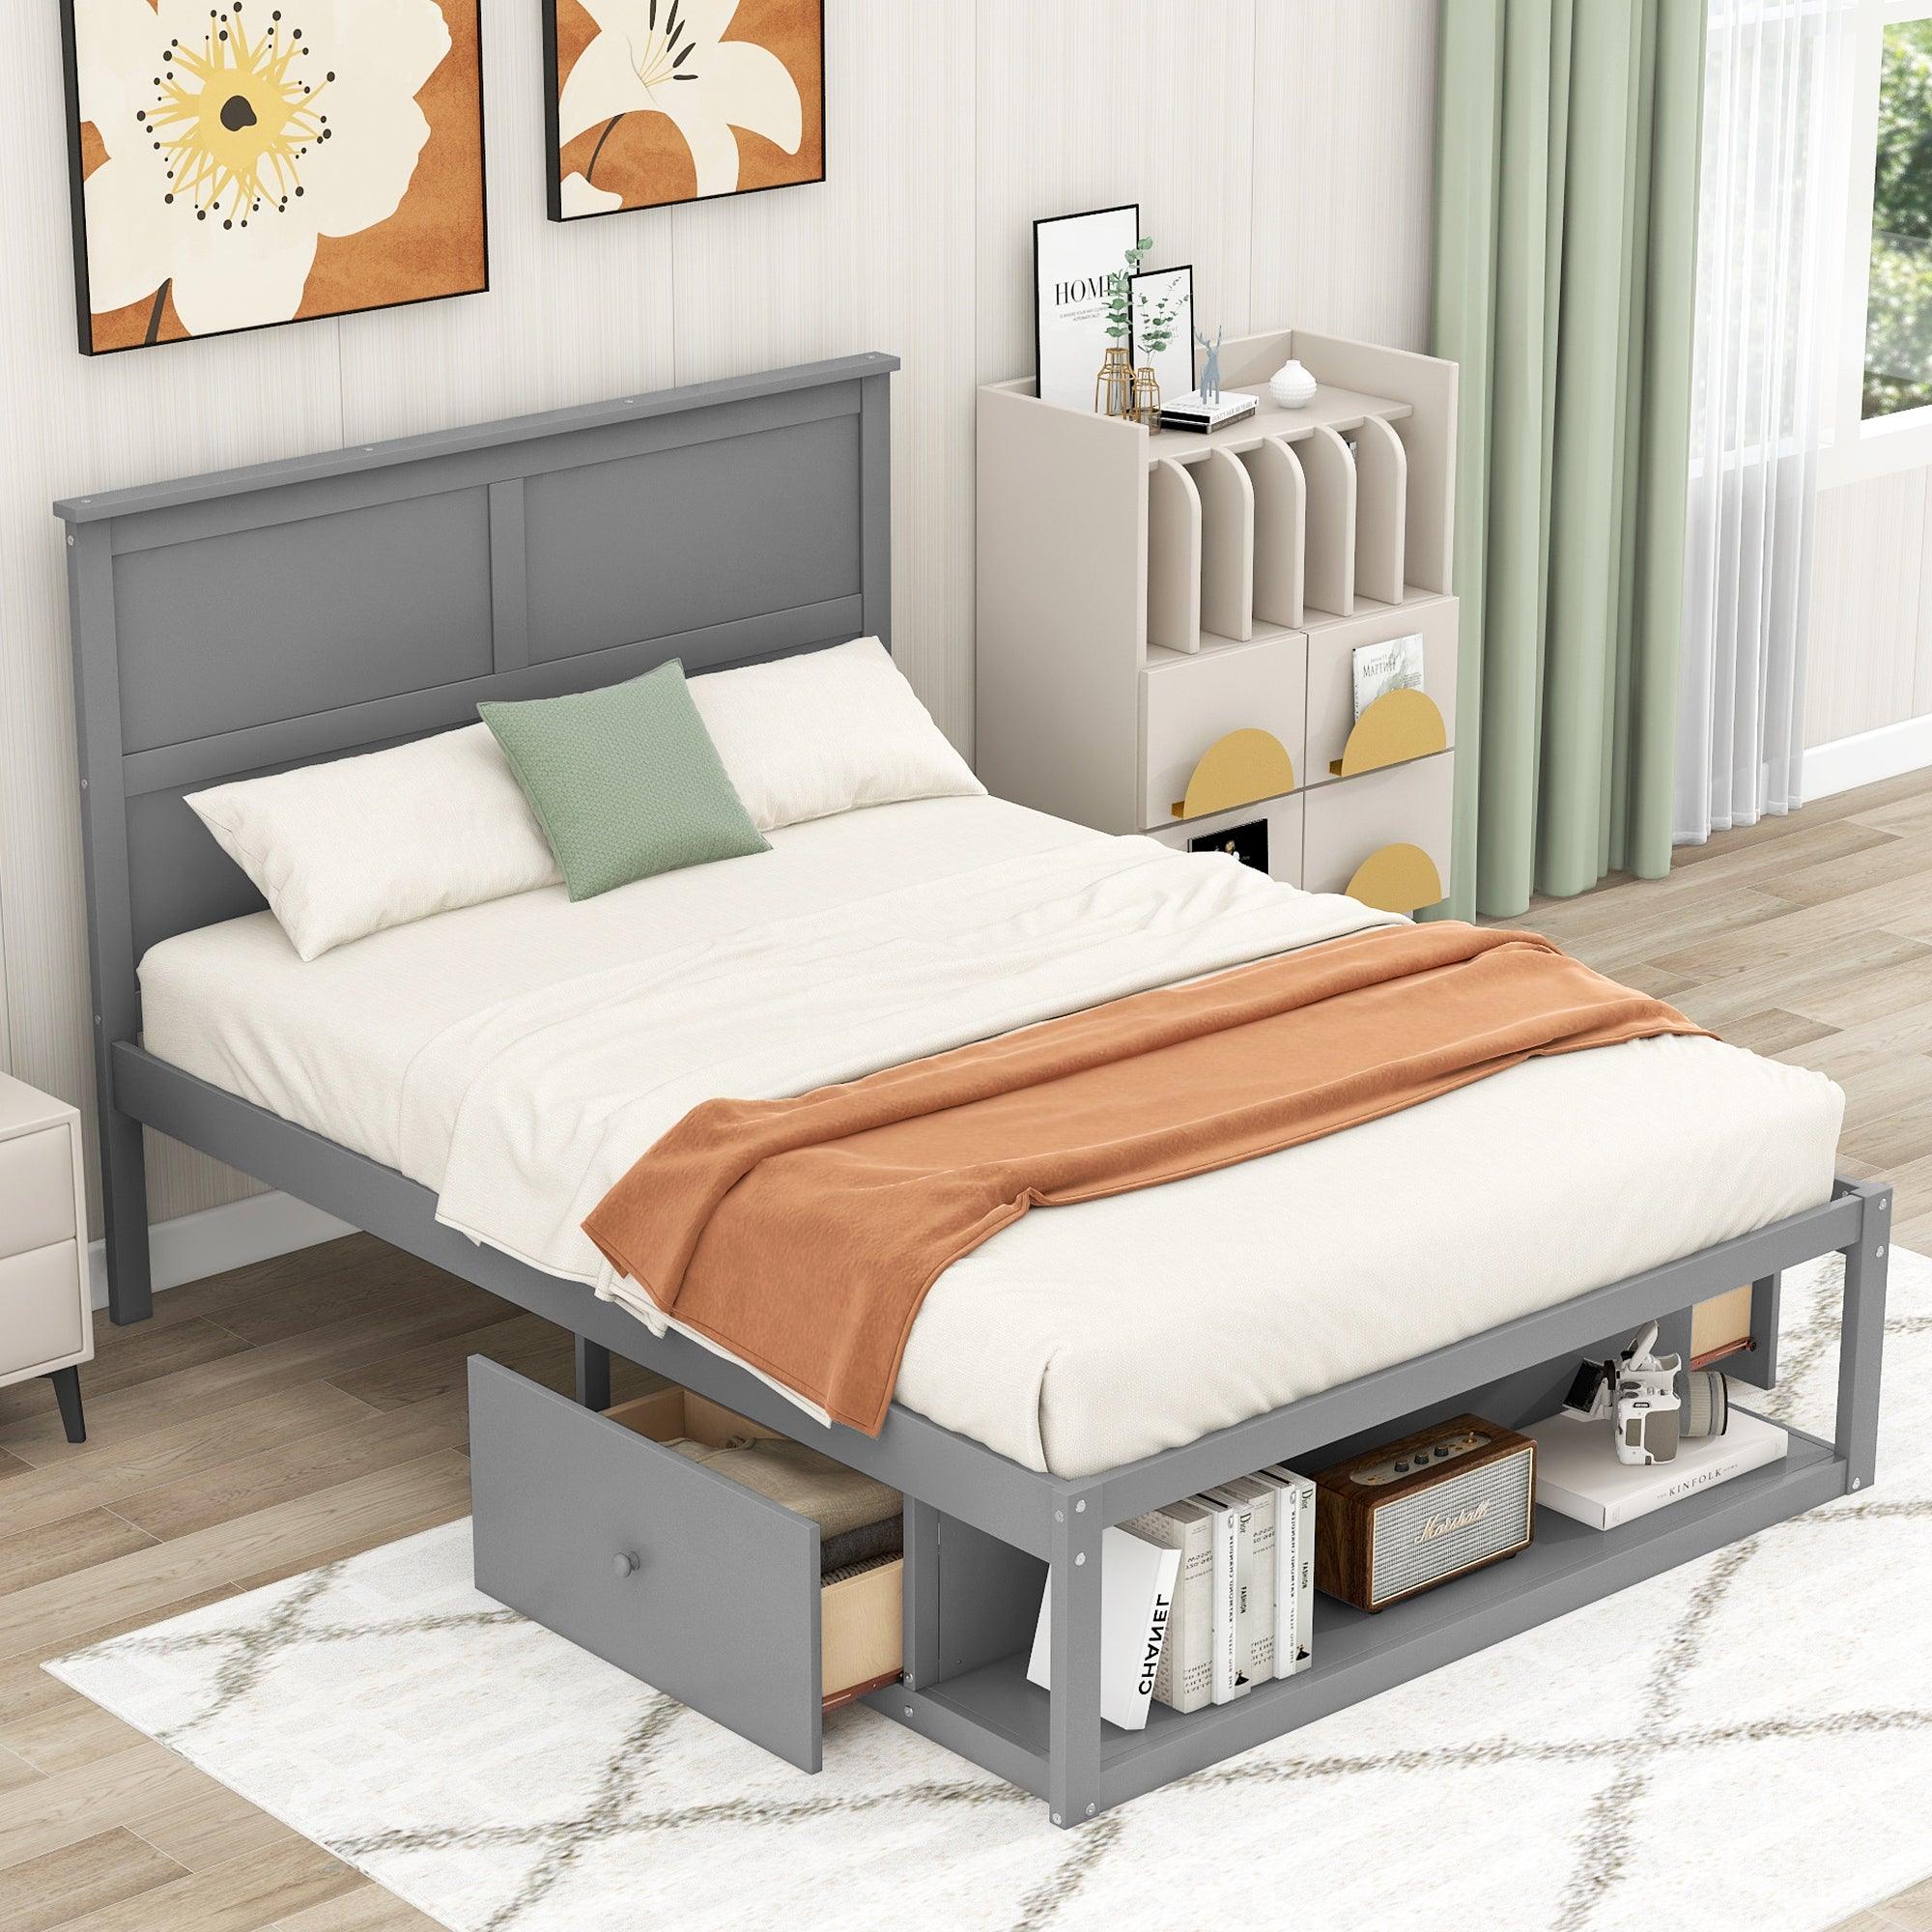 🆓🚛 Full Size Platform Bed With Drawer On The Each Side and Shelf On The End Of The Bed, Gray